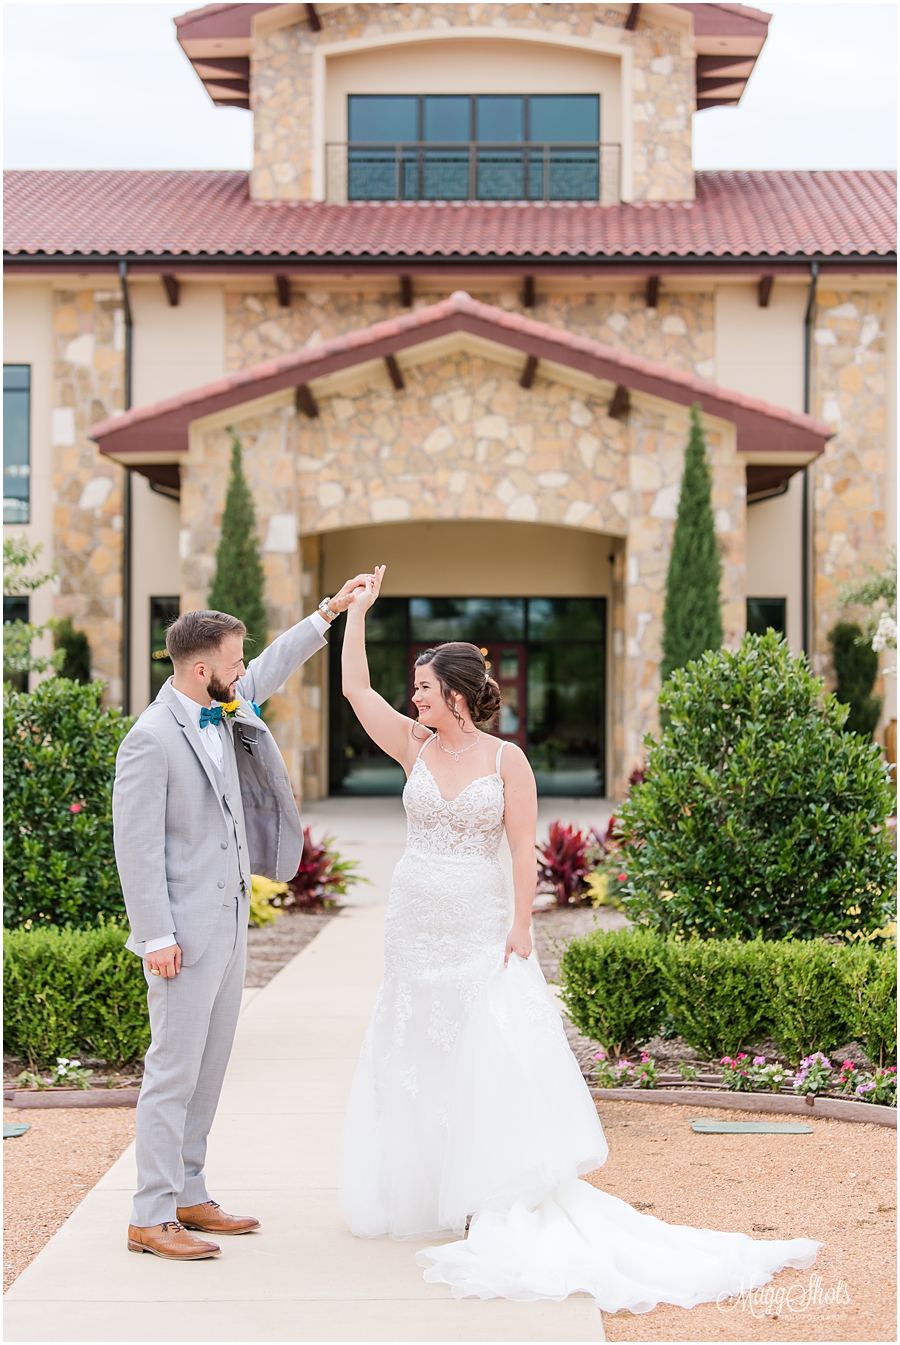 MaggShots Photography, DFW Wedding Photographer, Verona Villa Wedding Photographer, Verona Villa, Wedding Photographer, Verona Villa Wedding, romantics, bride and groom, bride and groom portraits, dancing, spin